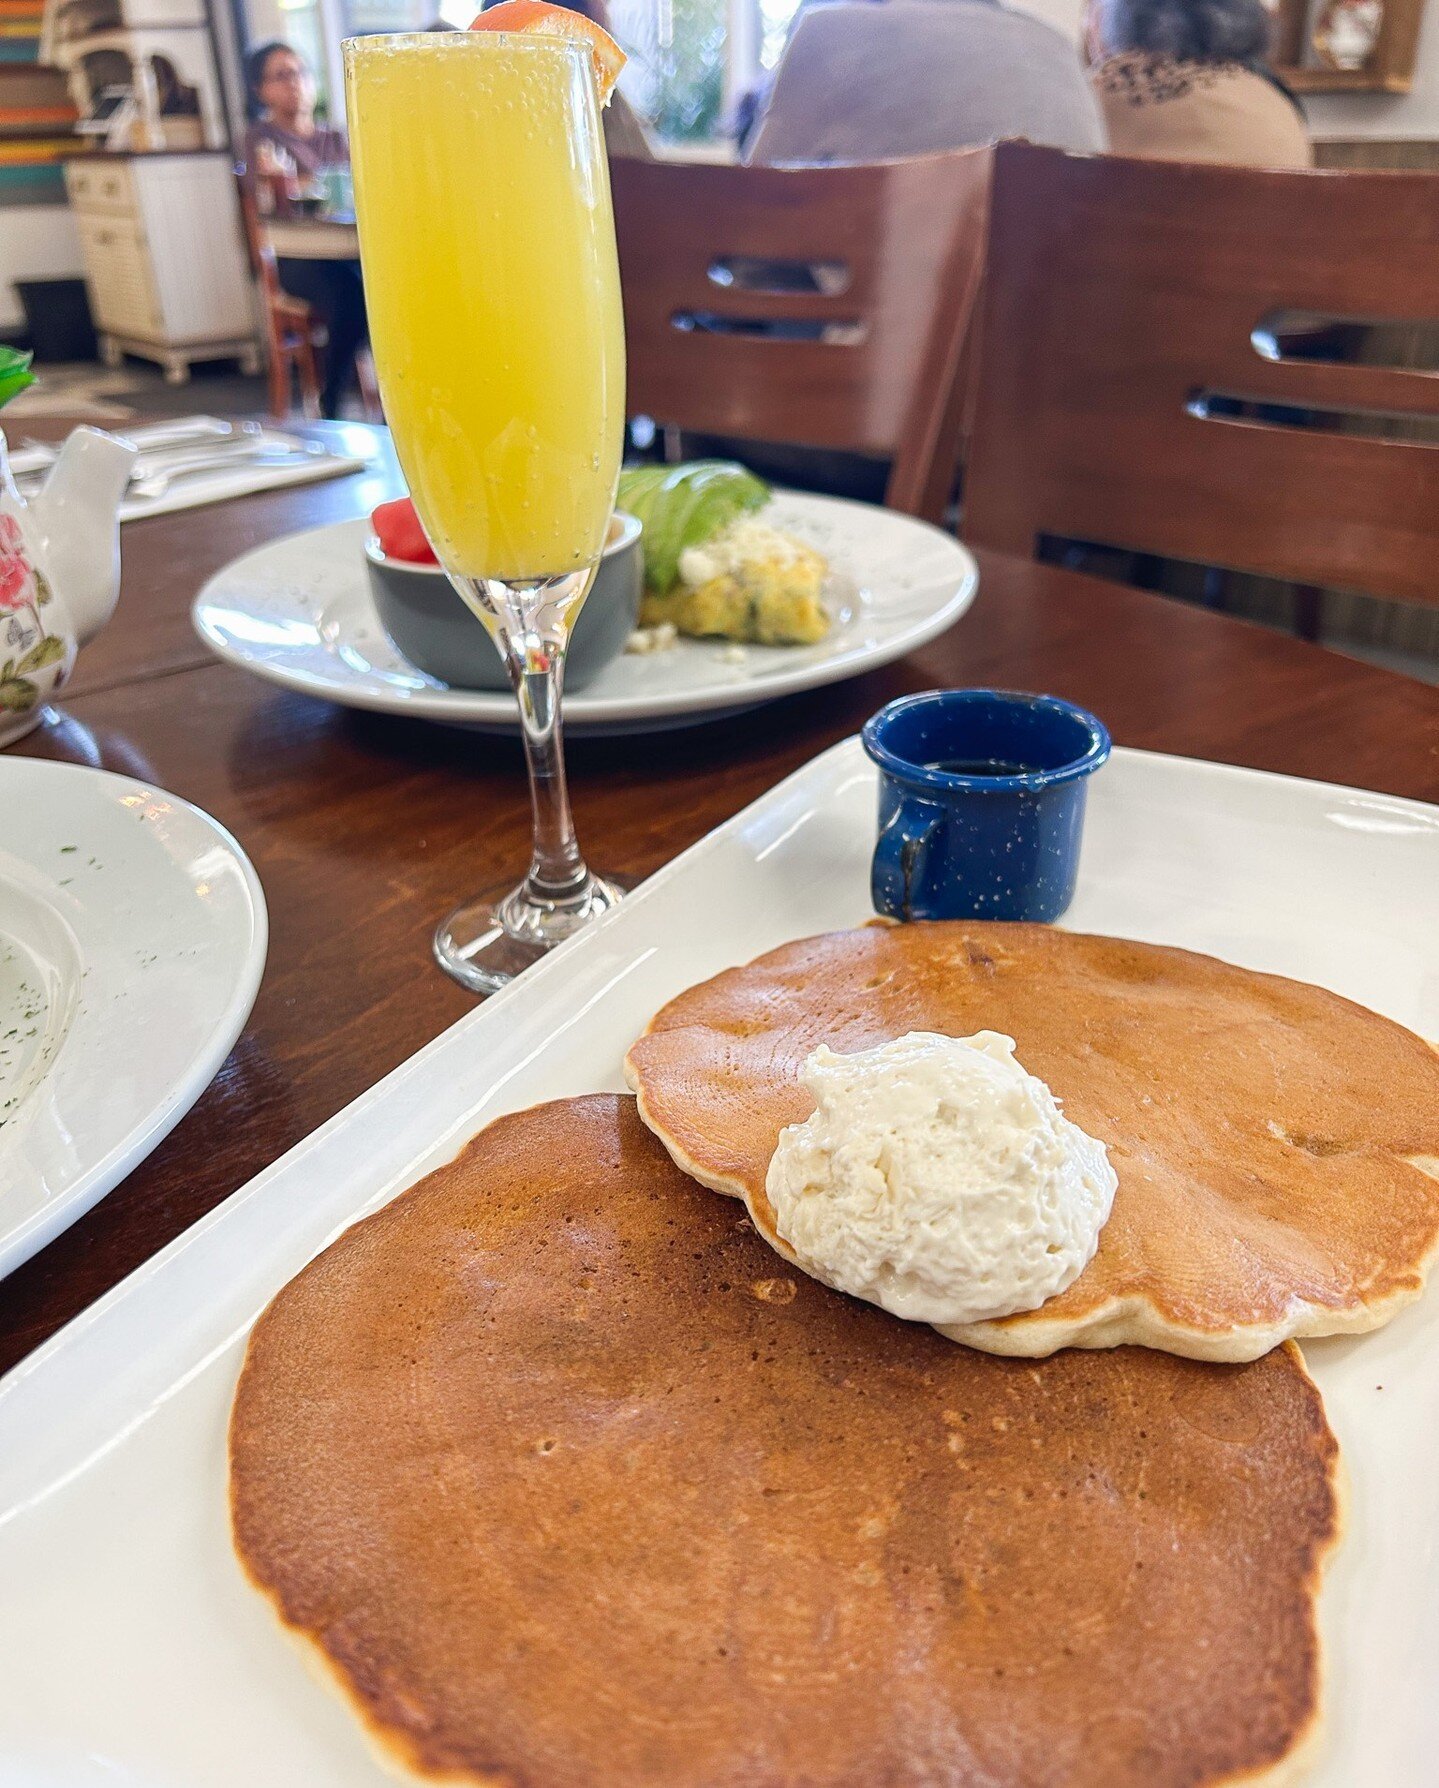 Fluffy pancakes with a chilled mimosa?  Yes, please!